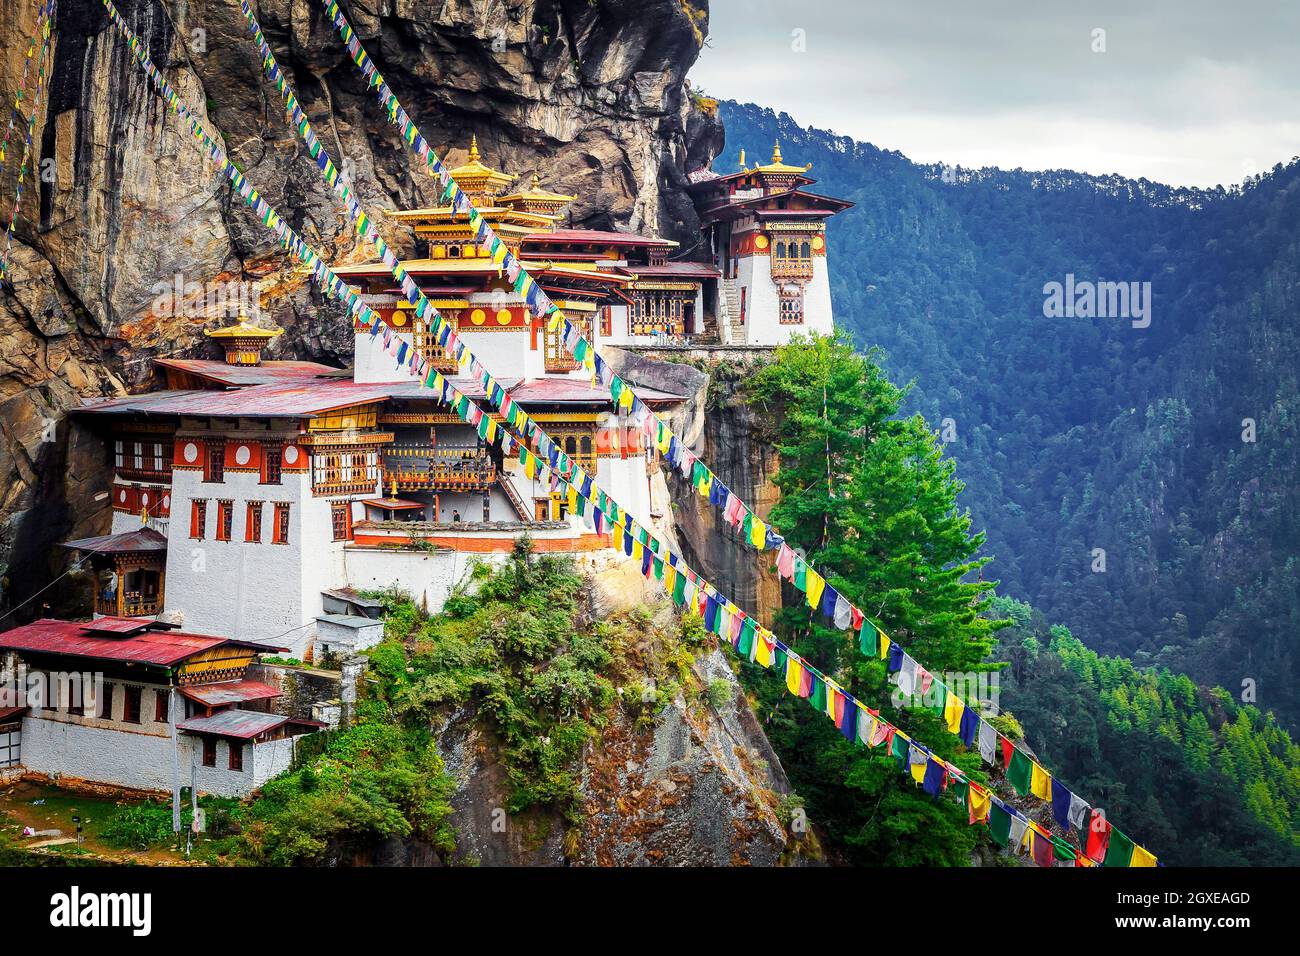 Paro Taktsang, also known as the Taktsang Palphug Monastery and the Tiger's Nest is a sacred Vajrayana Himalayan Buddhist site located in the cliffsid Stock Photo